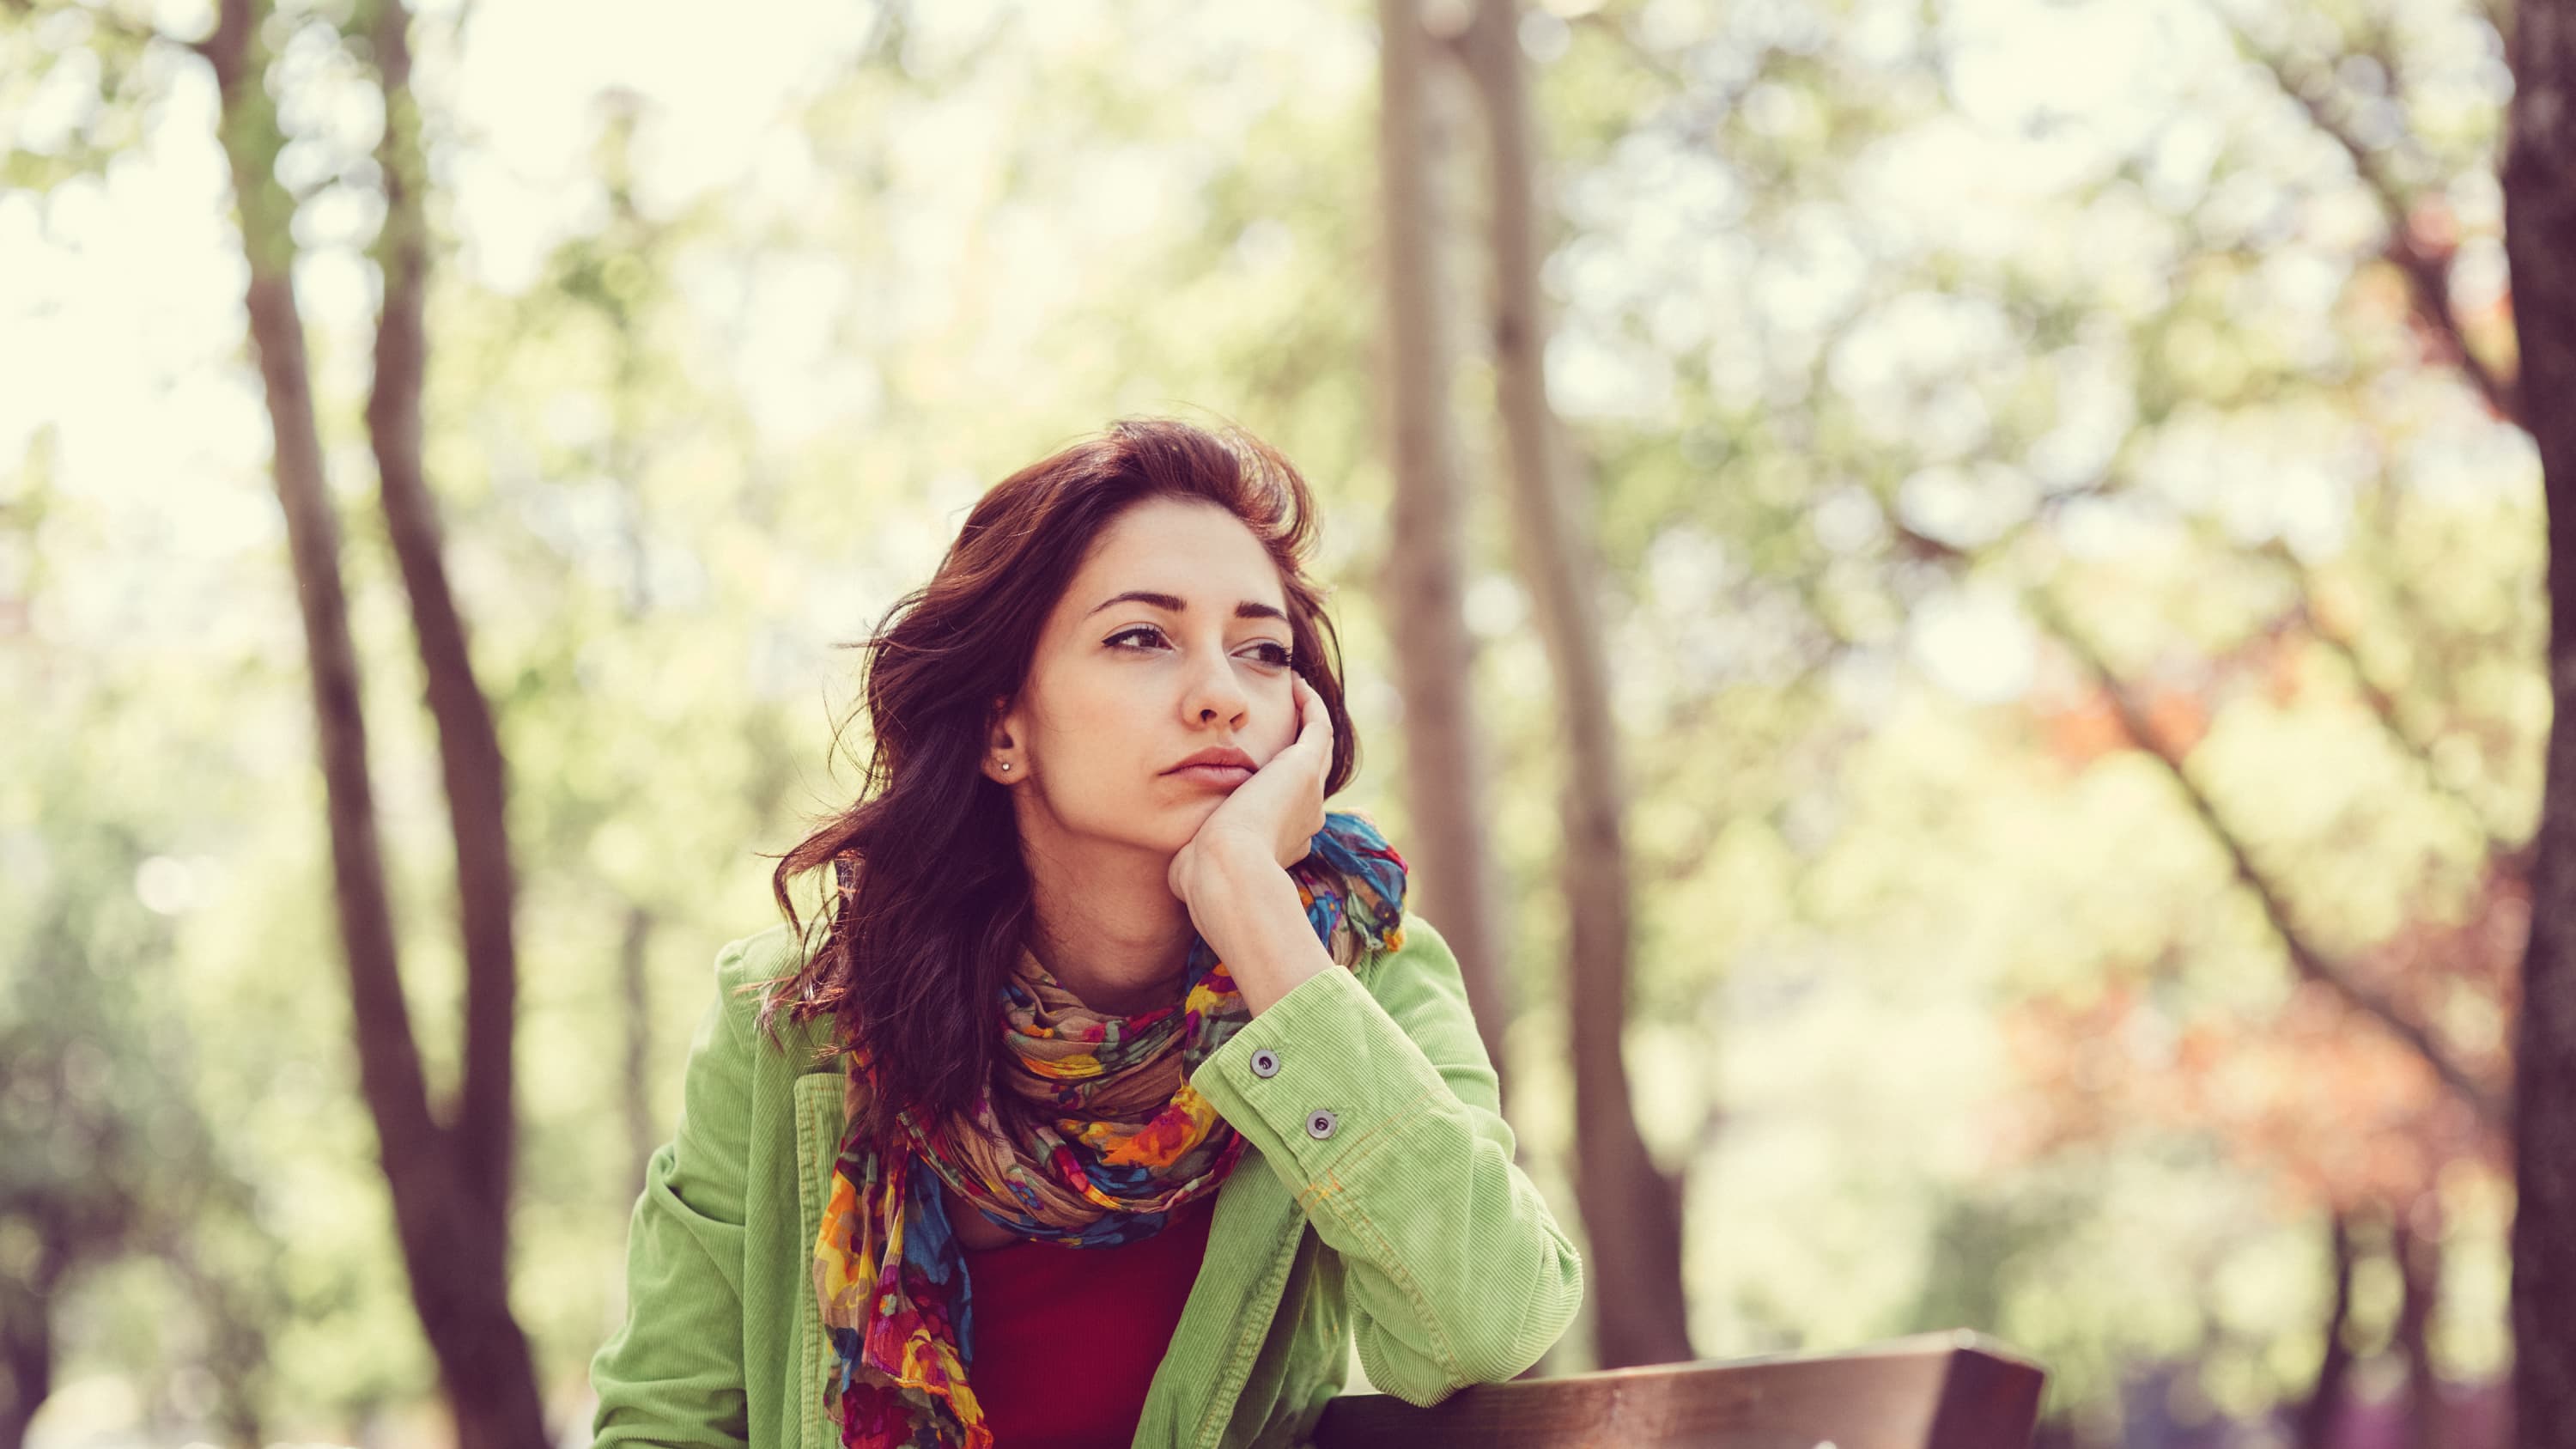 Thoughtful woman, possibly worried about HPV-related cancer